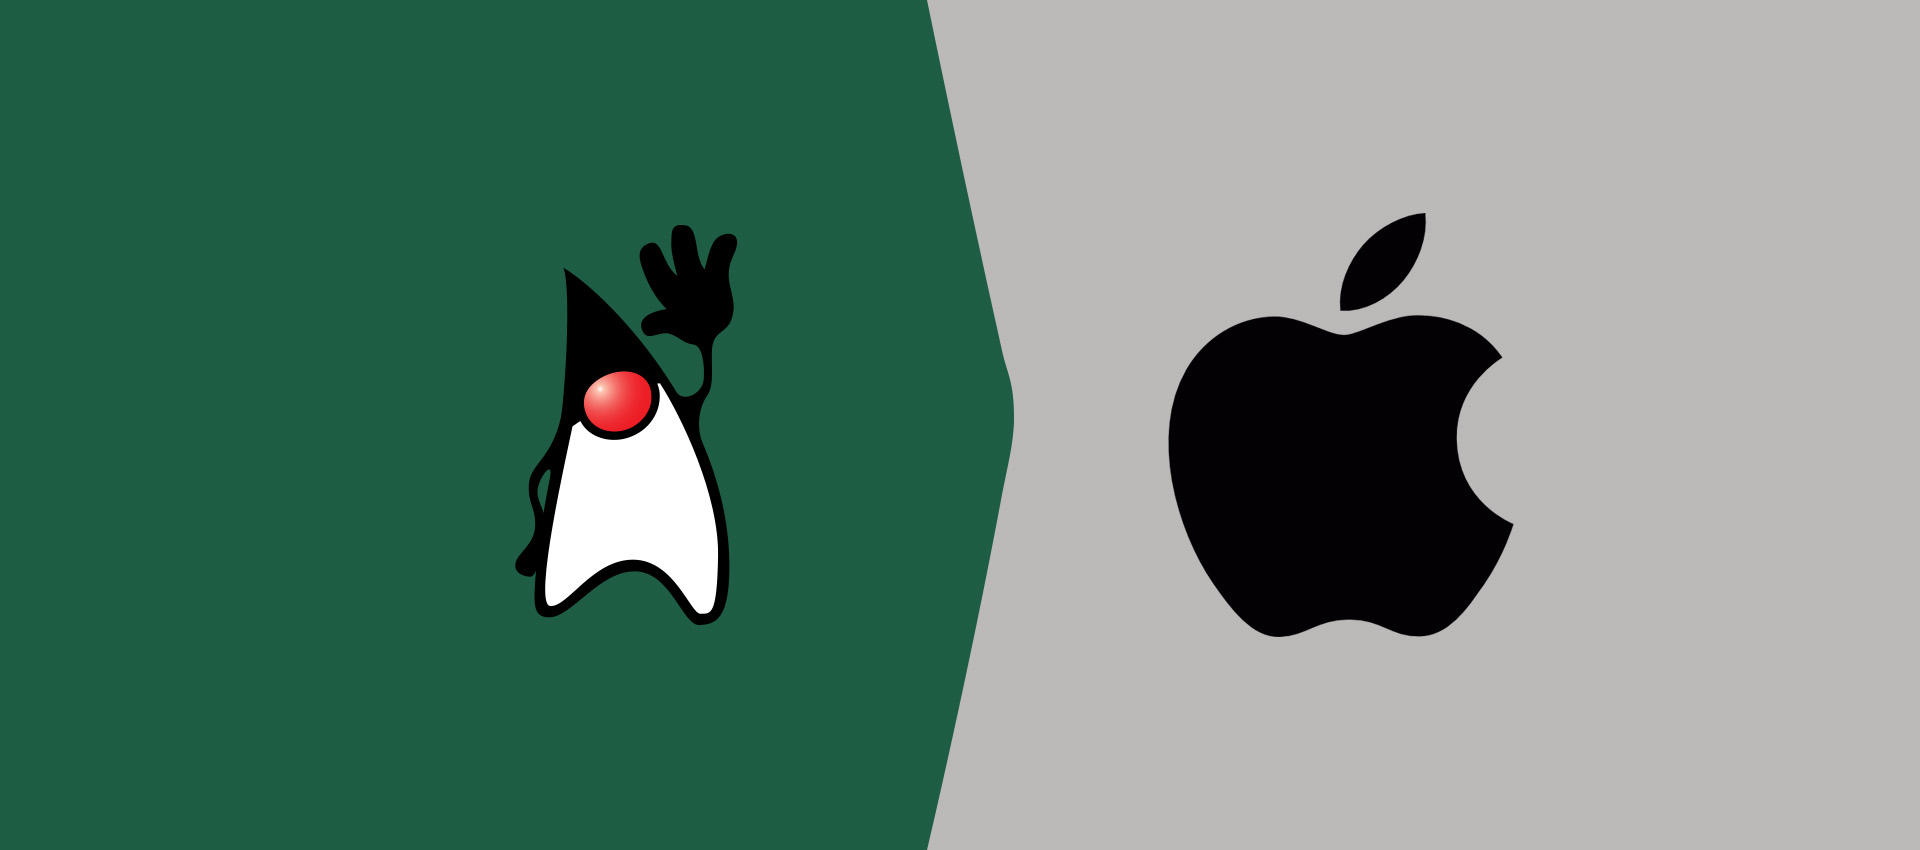 How To Install OpenJDK 14 On Mac